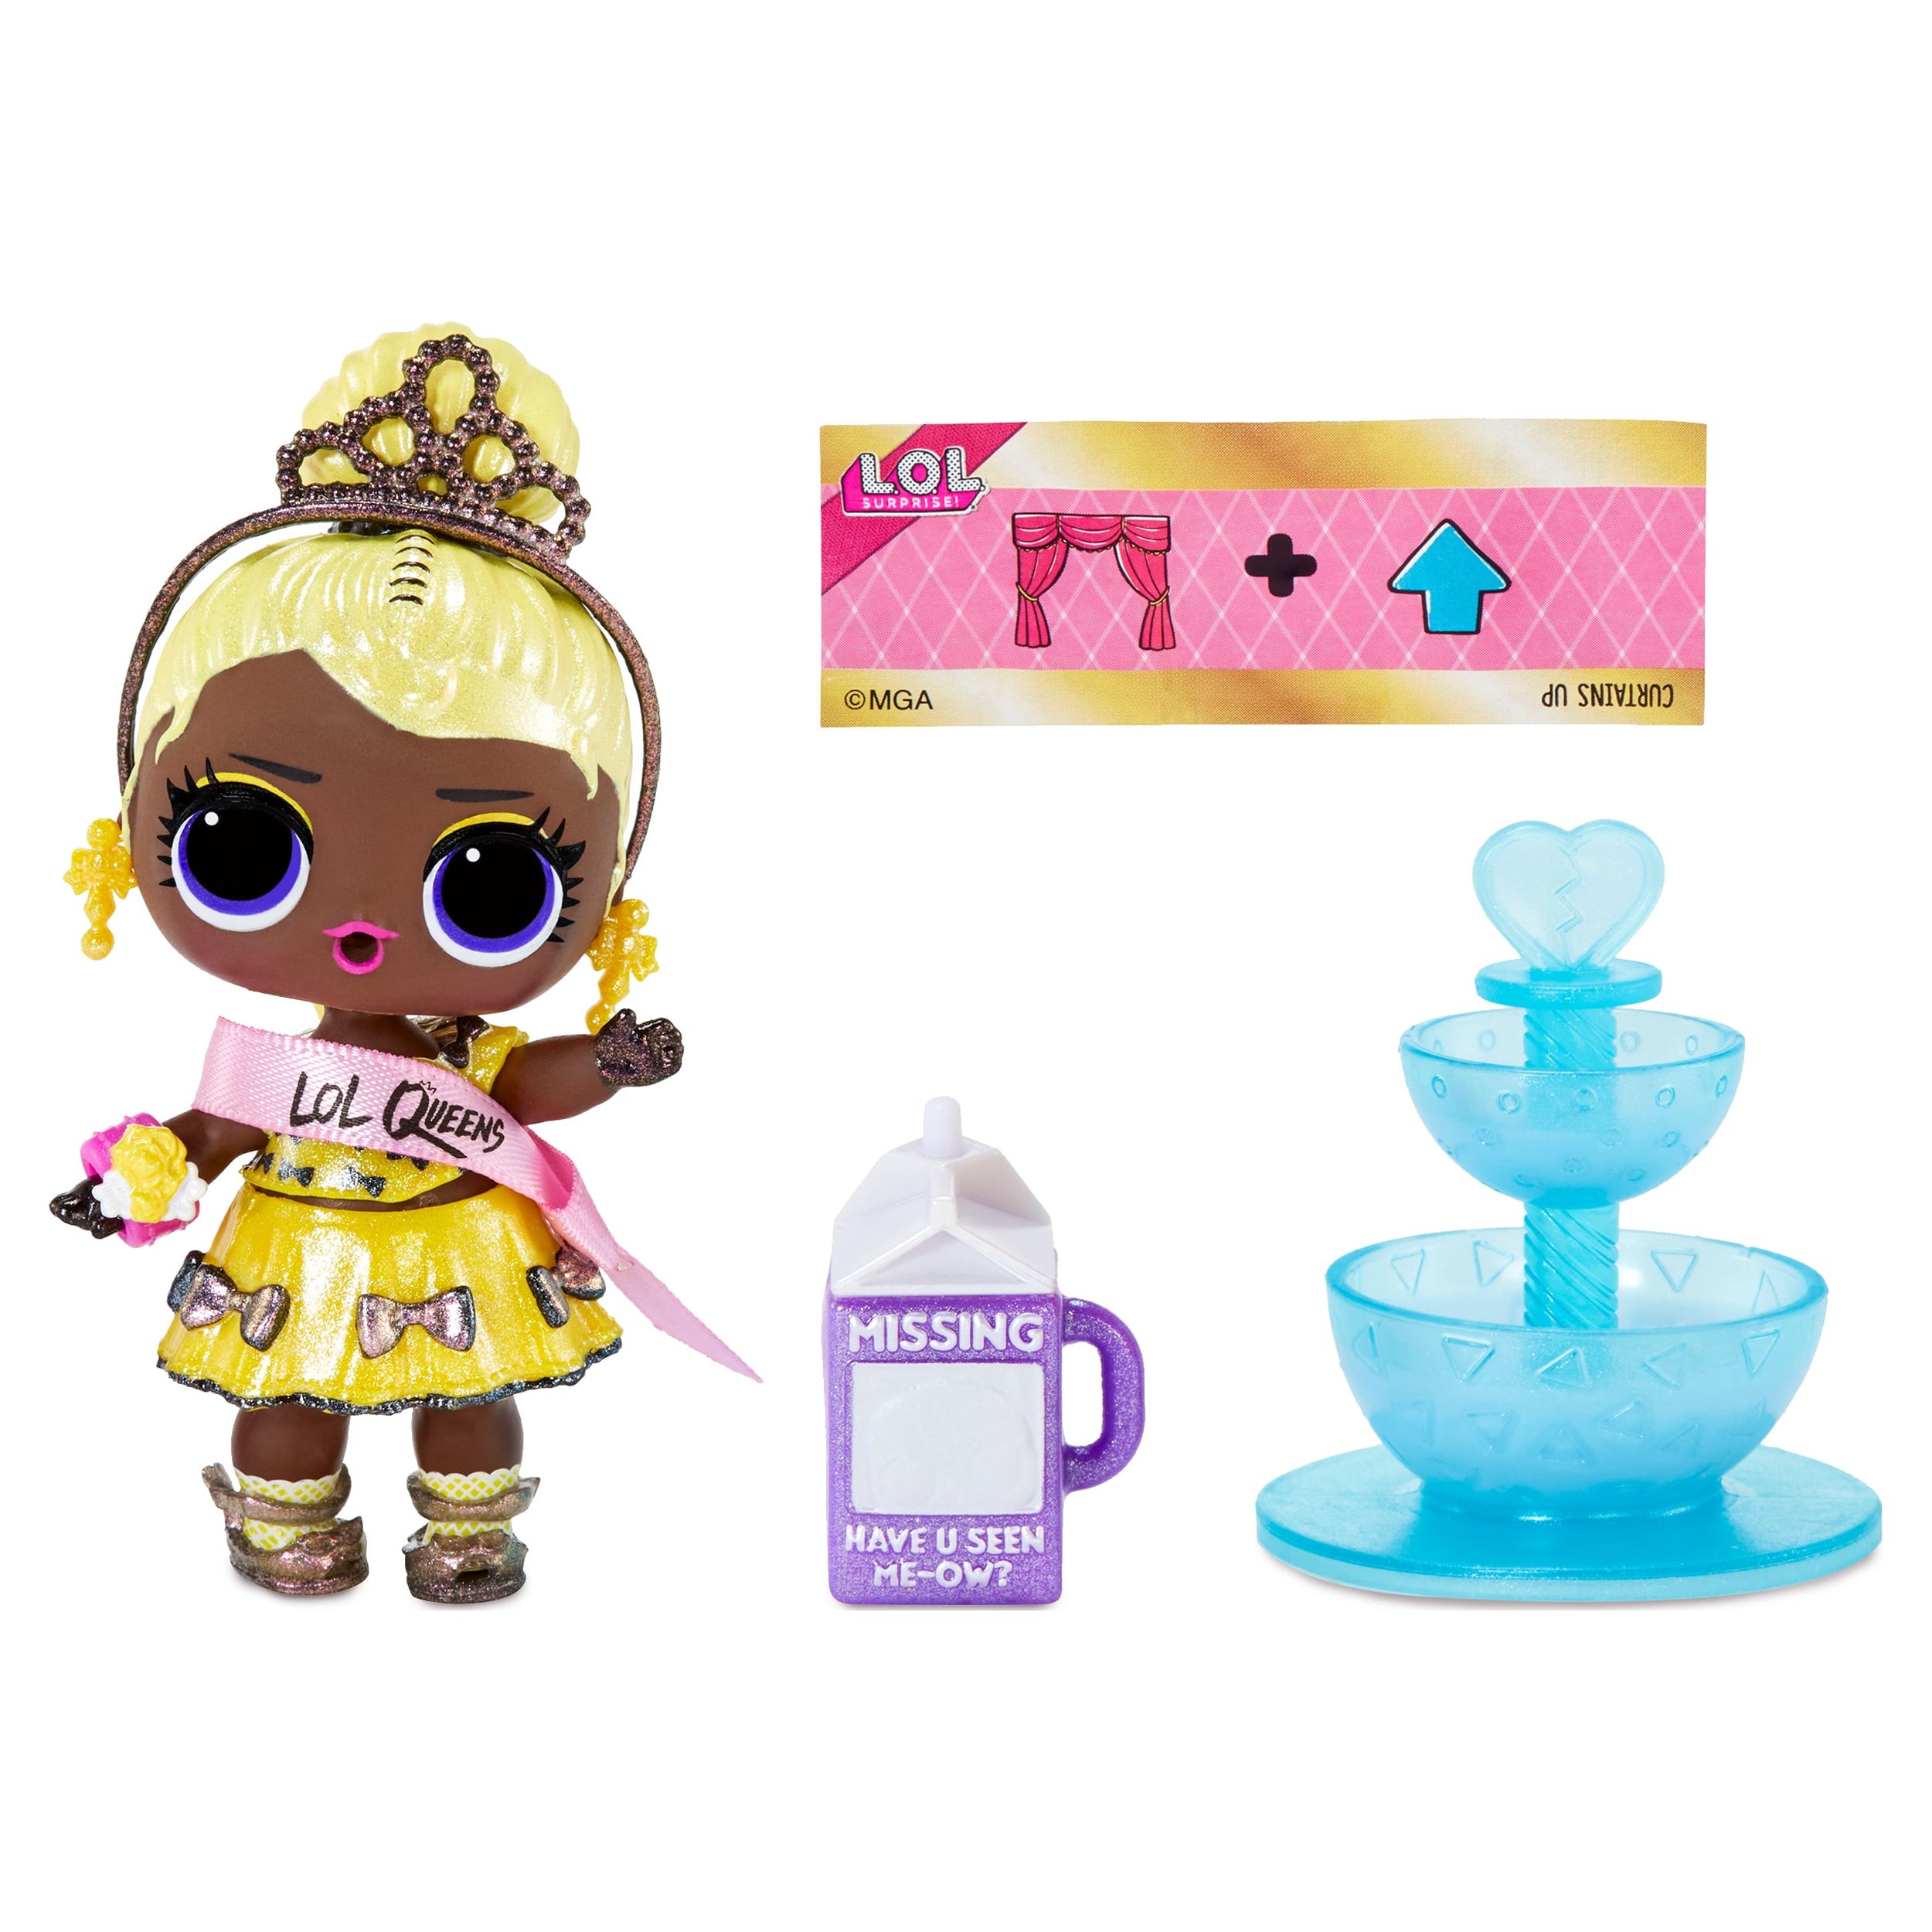 lol surprise queens dolls with 9 surprises including doll, fashions, and royal themed accessories - great gift for girls age 4+ - image 3 of 7